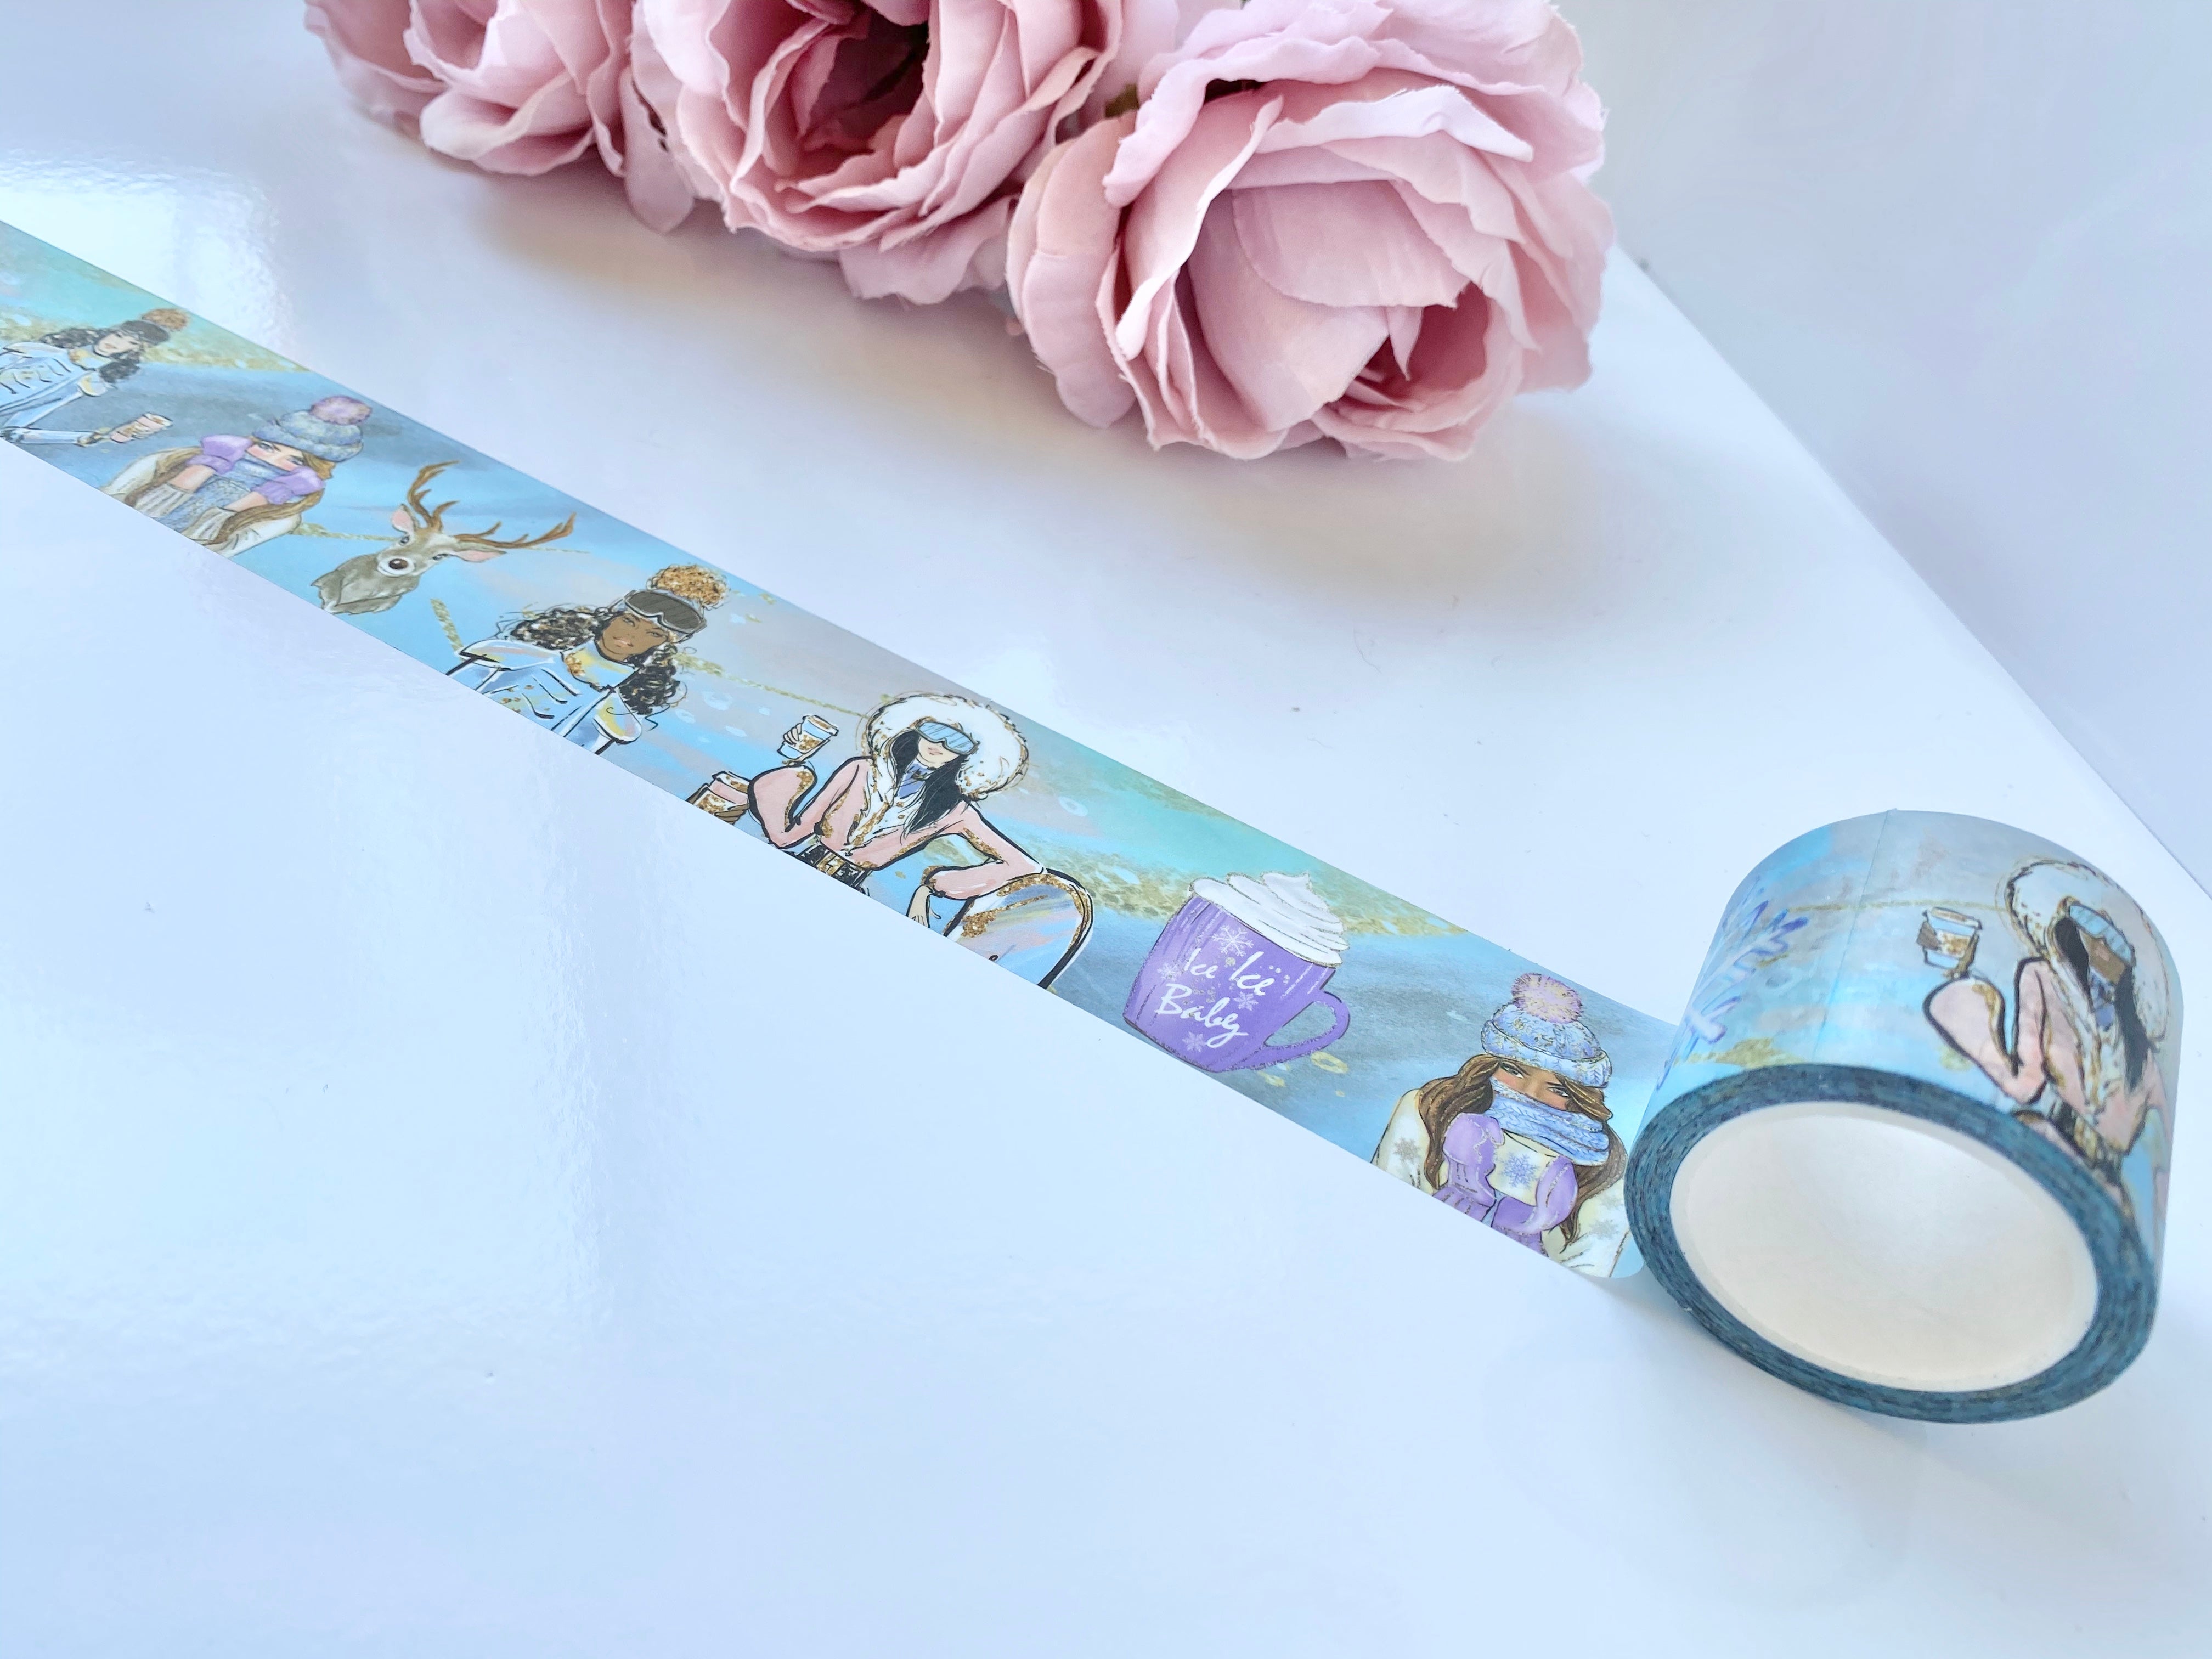 Ice Ice Baby Snow Girls Wide Washi Tape – The Fabulous Planner